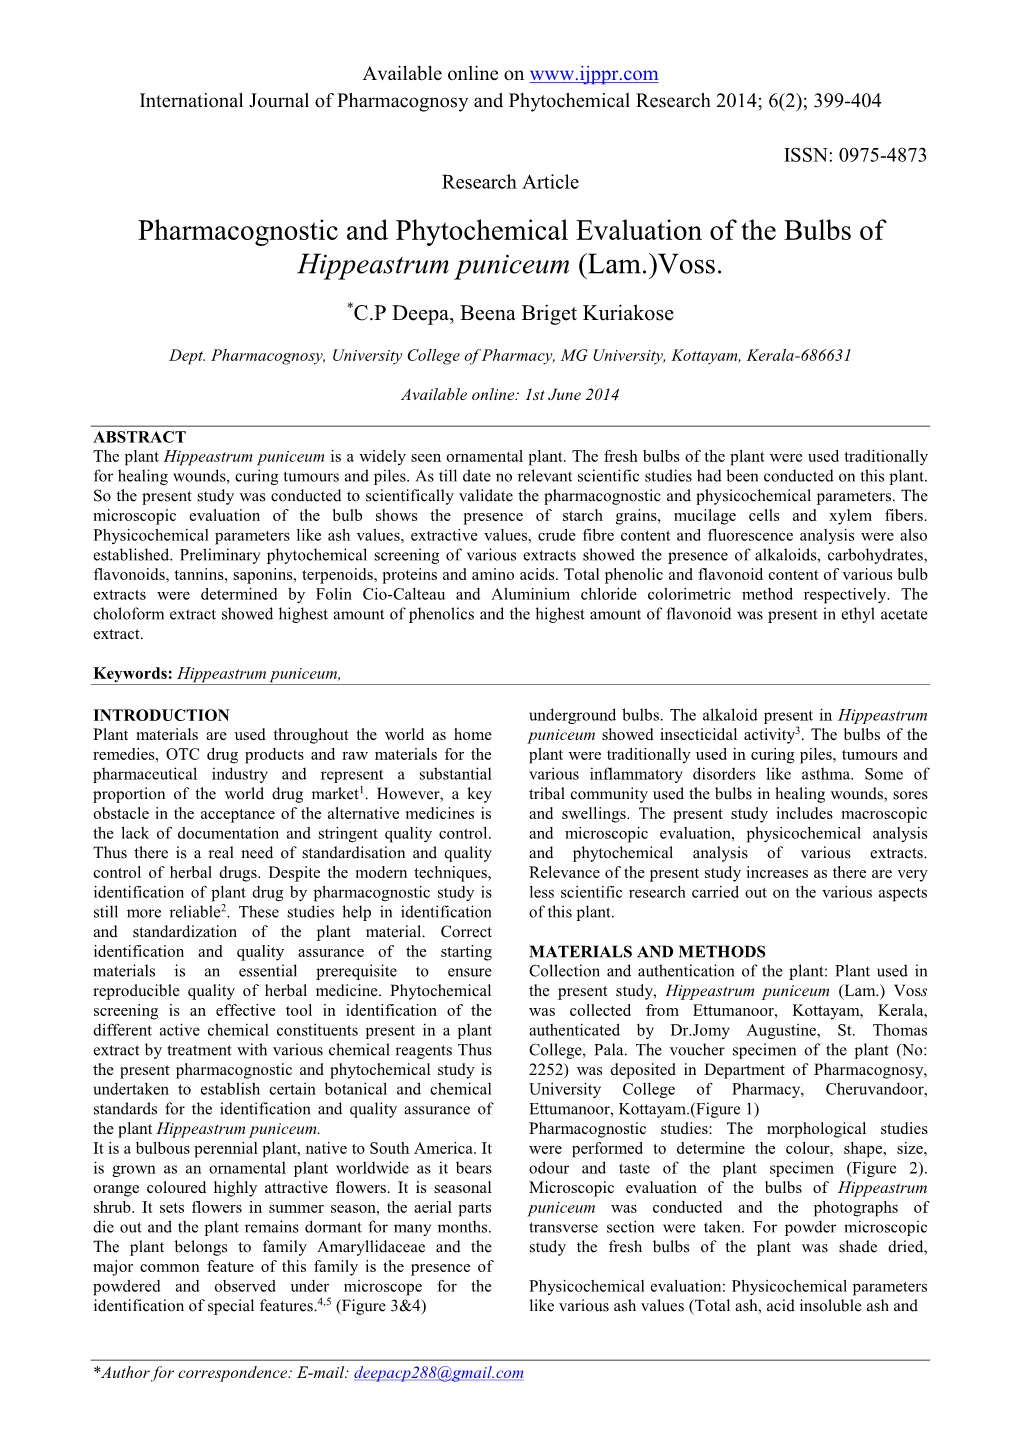 Pharmacognostic and Phytochemical Evaluation of the Bulbs of Hippeastrum Puniceum (Lam.)Voss